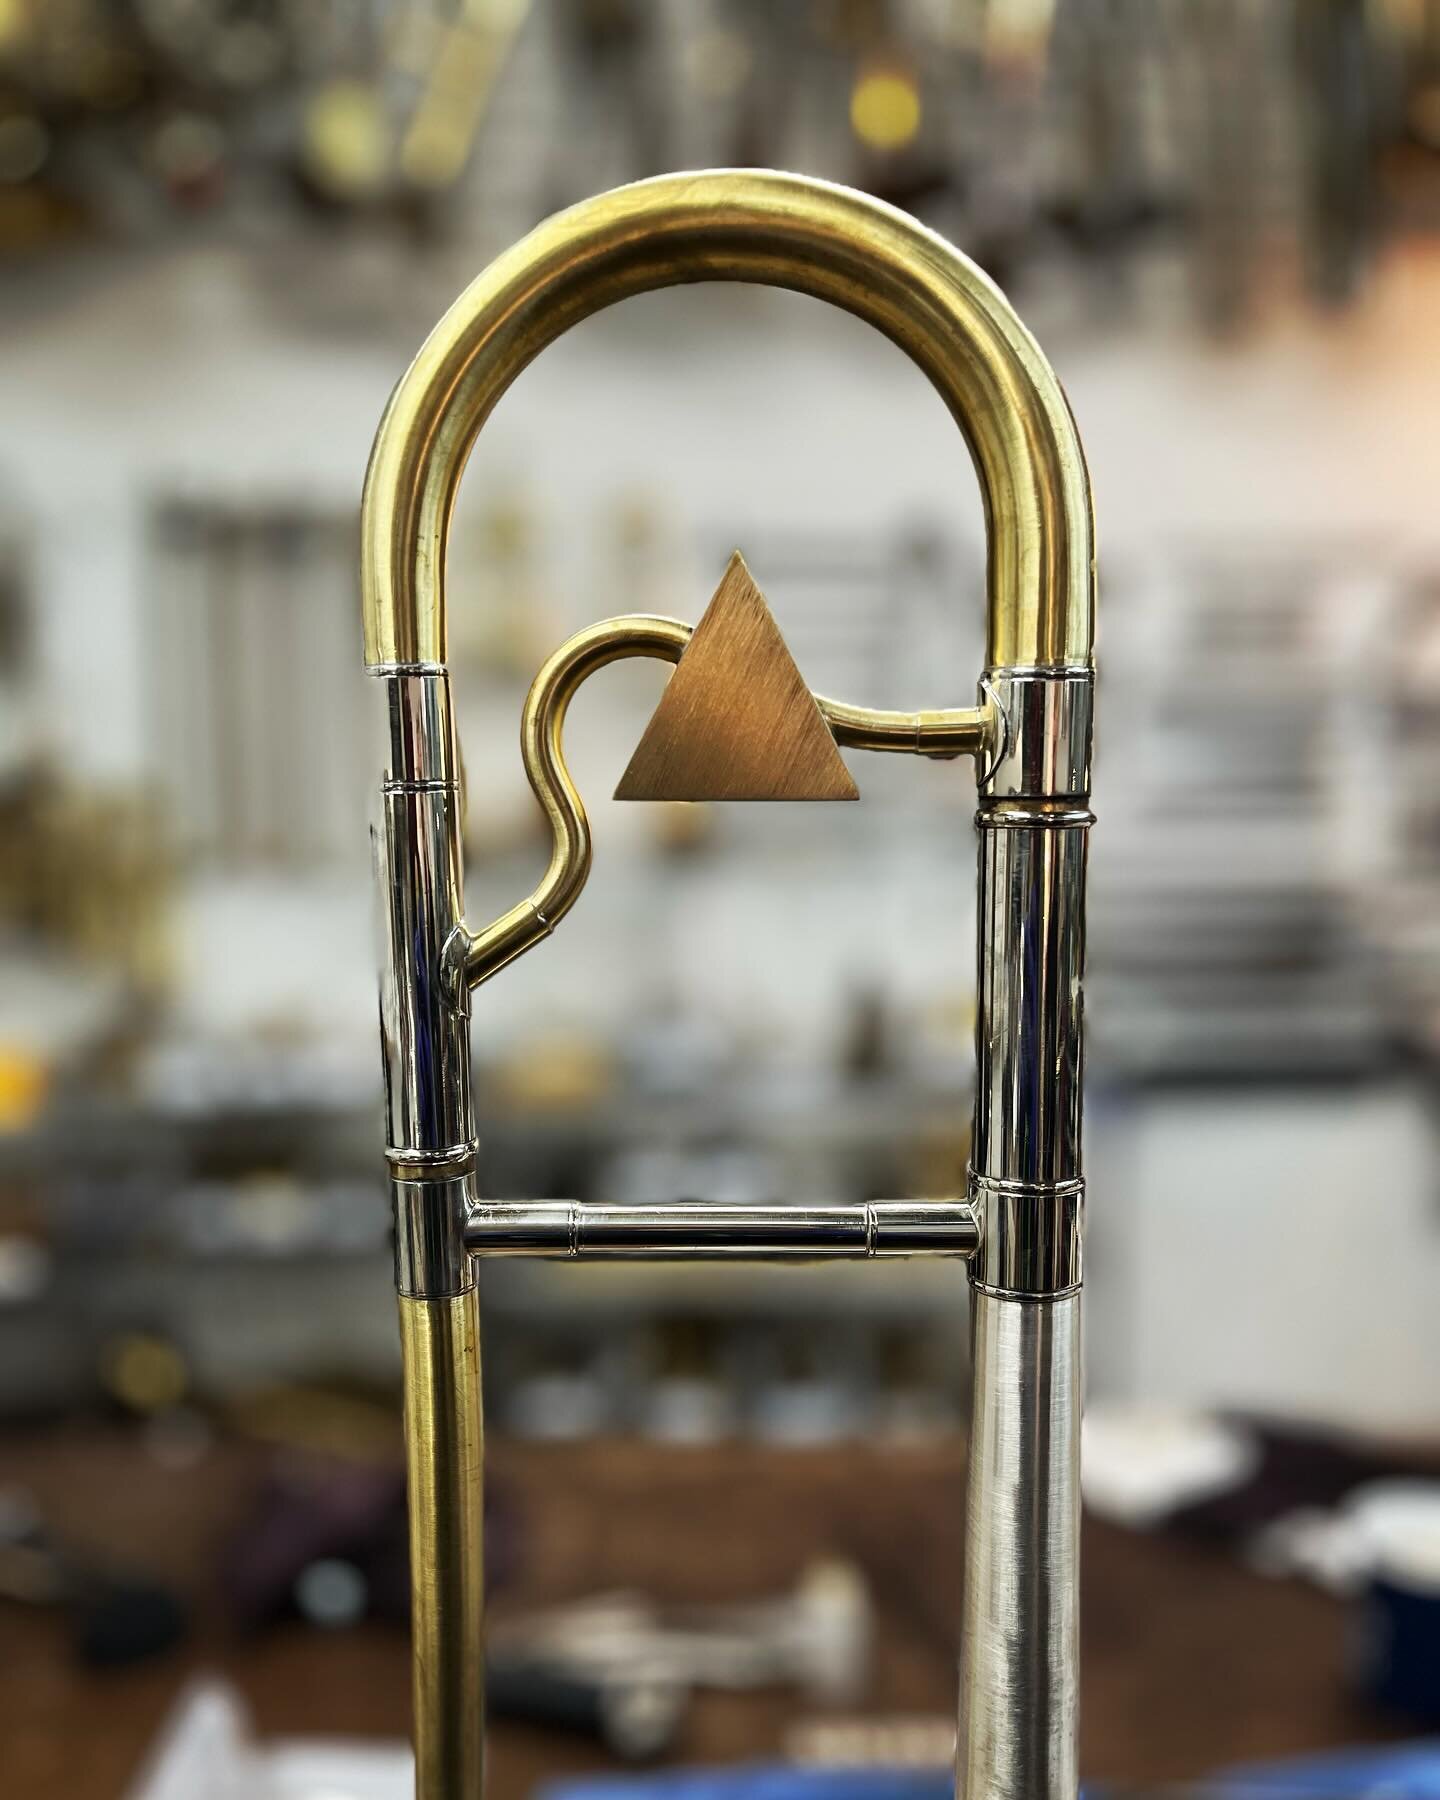 Simple, but whimsical. King 3B silversonic now with custom weight and satin finish. And yes, Mickey does find the post-it-notes to be a quality pillow. 

#SweeneyBrass
#strip 
#quality
#shopcat
#custom
#patina
#trombone 
#basstrombone 
#doneright 
#m